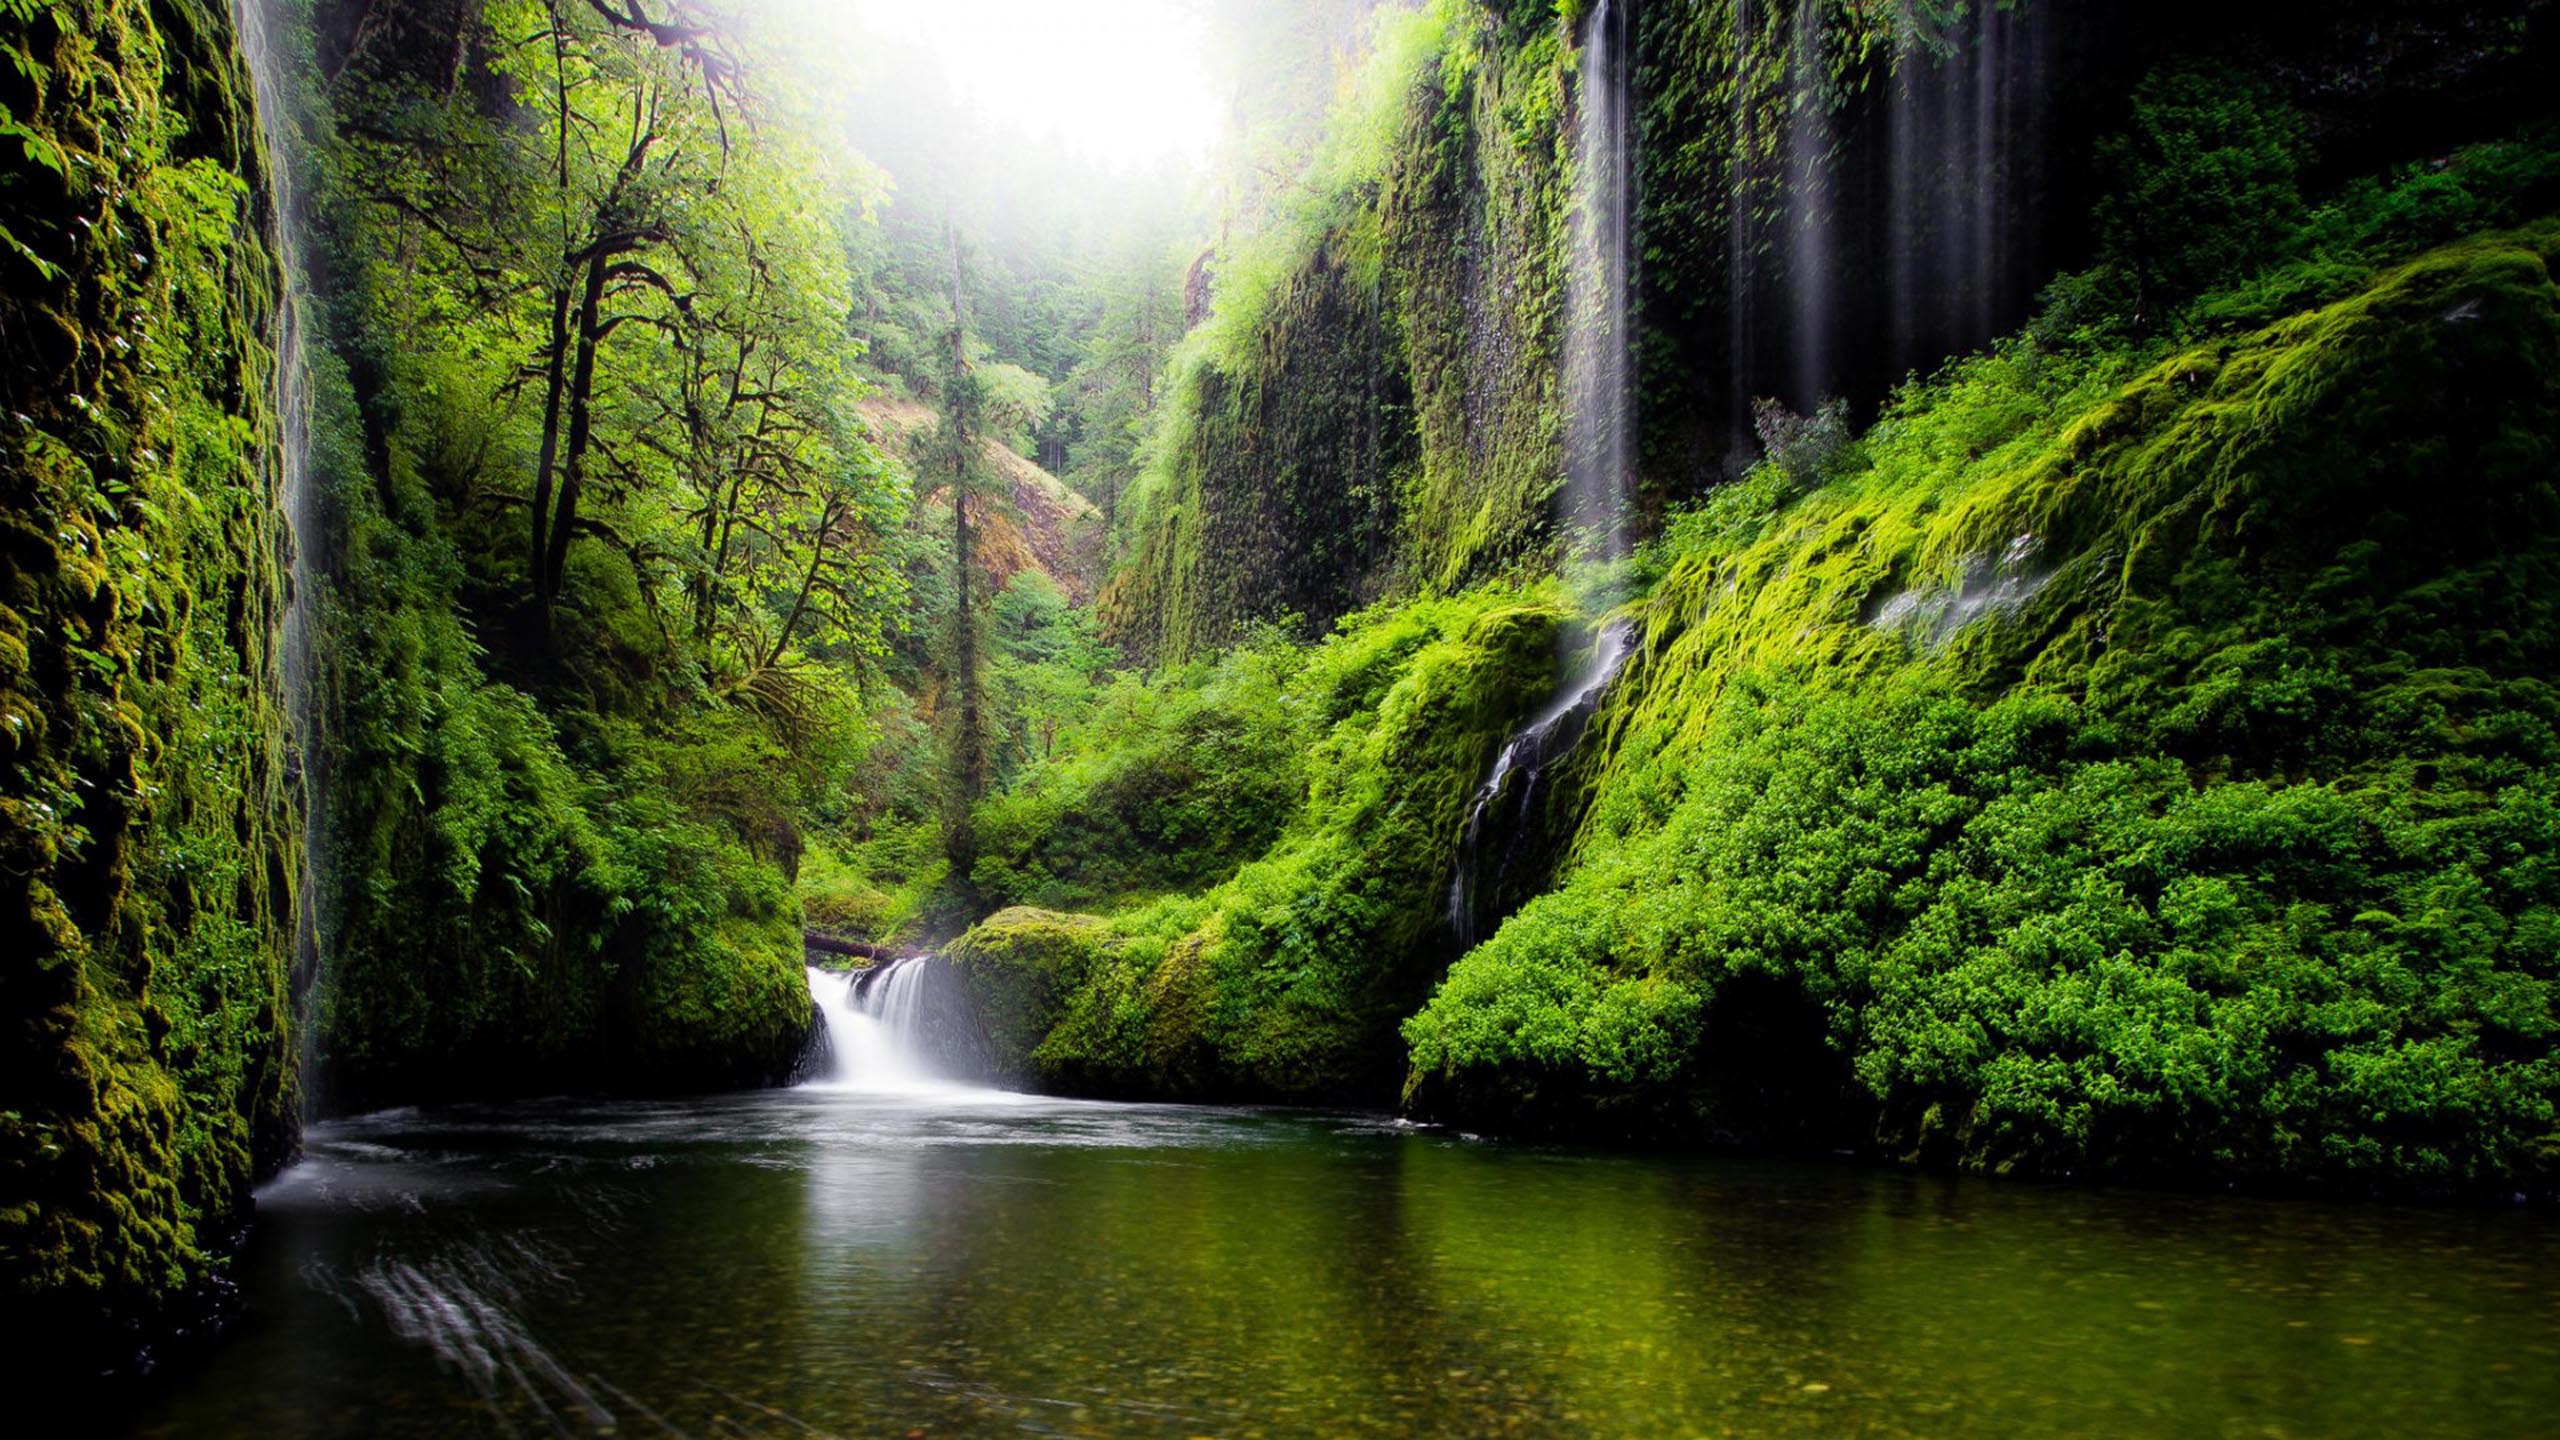 Wallpaper Water Falls in The Middle of Green Trees, Background Free Image